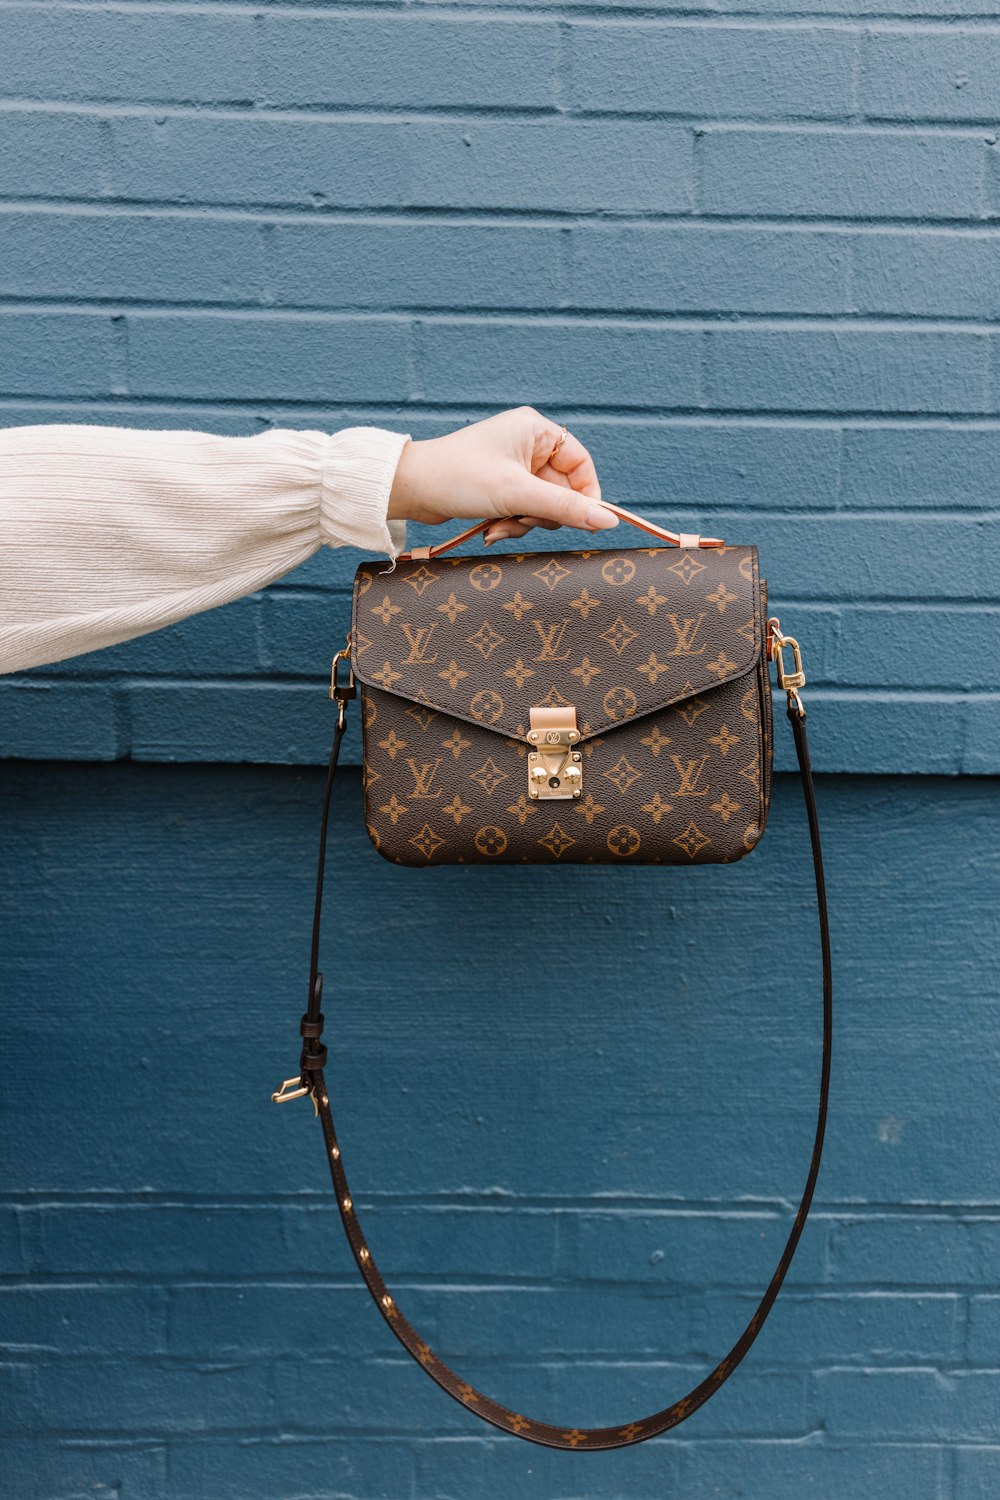 How Much Does It Cost To Clean A Louis Vuitton Bag